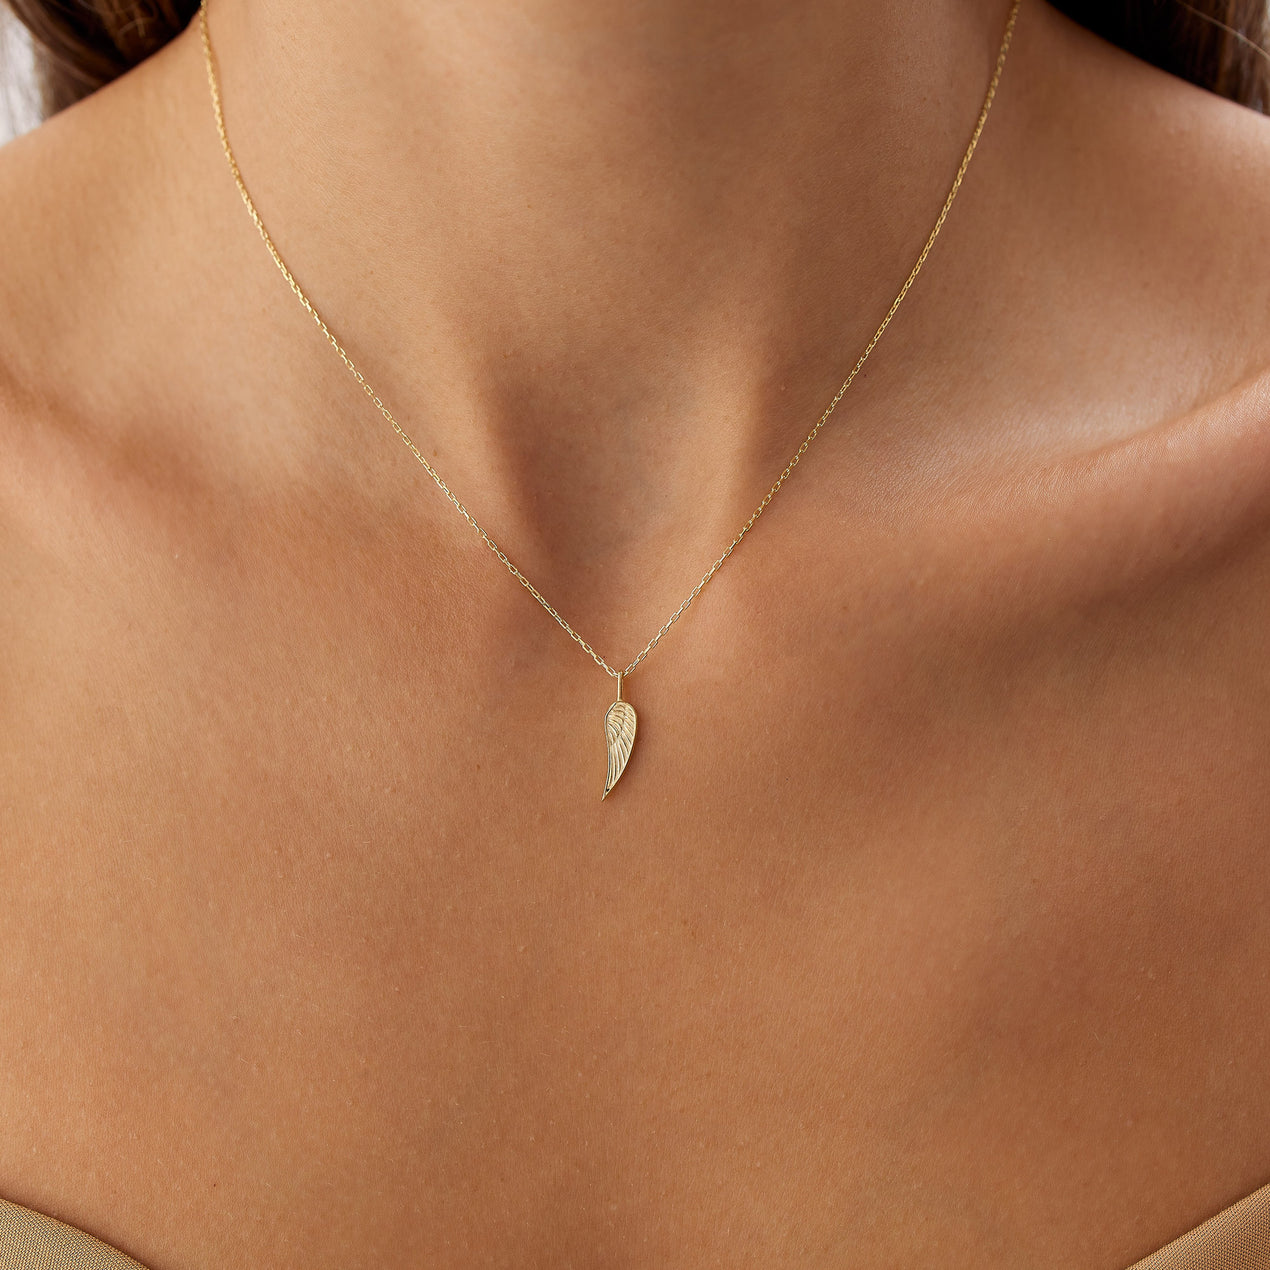 Wing Woman Necklace Gold, NECKLACES